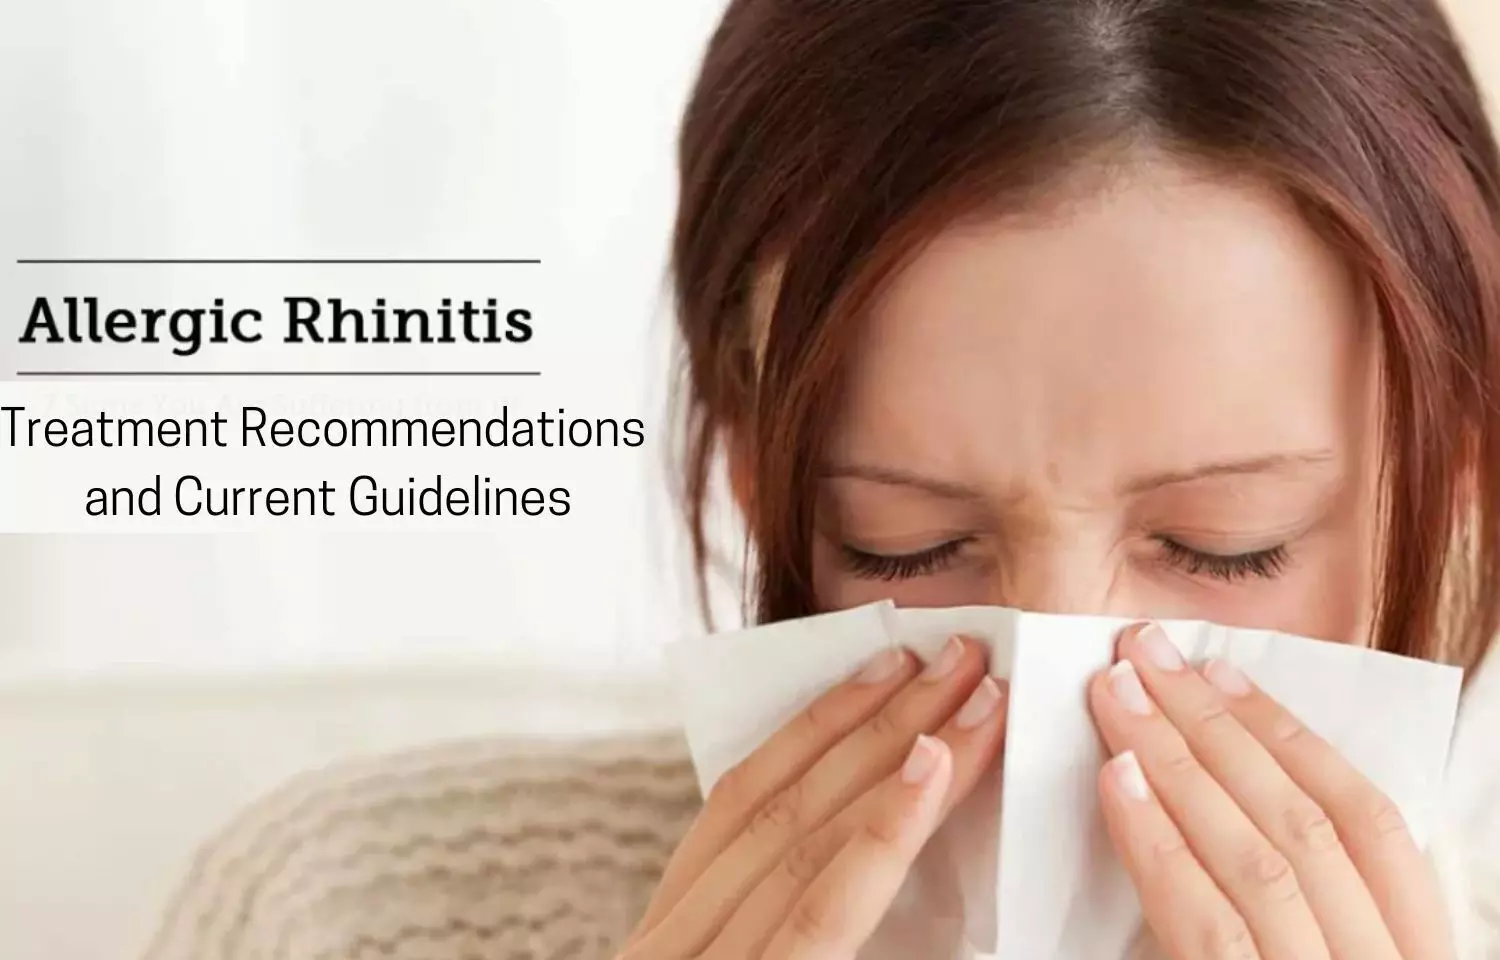 Allergic rhinitis-an overview on treatment recommendations and current guidelines